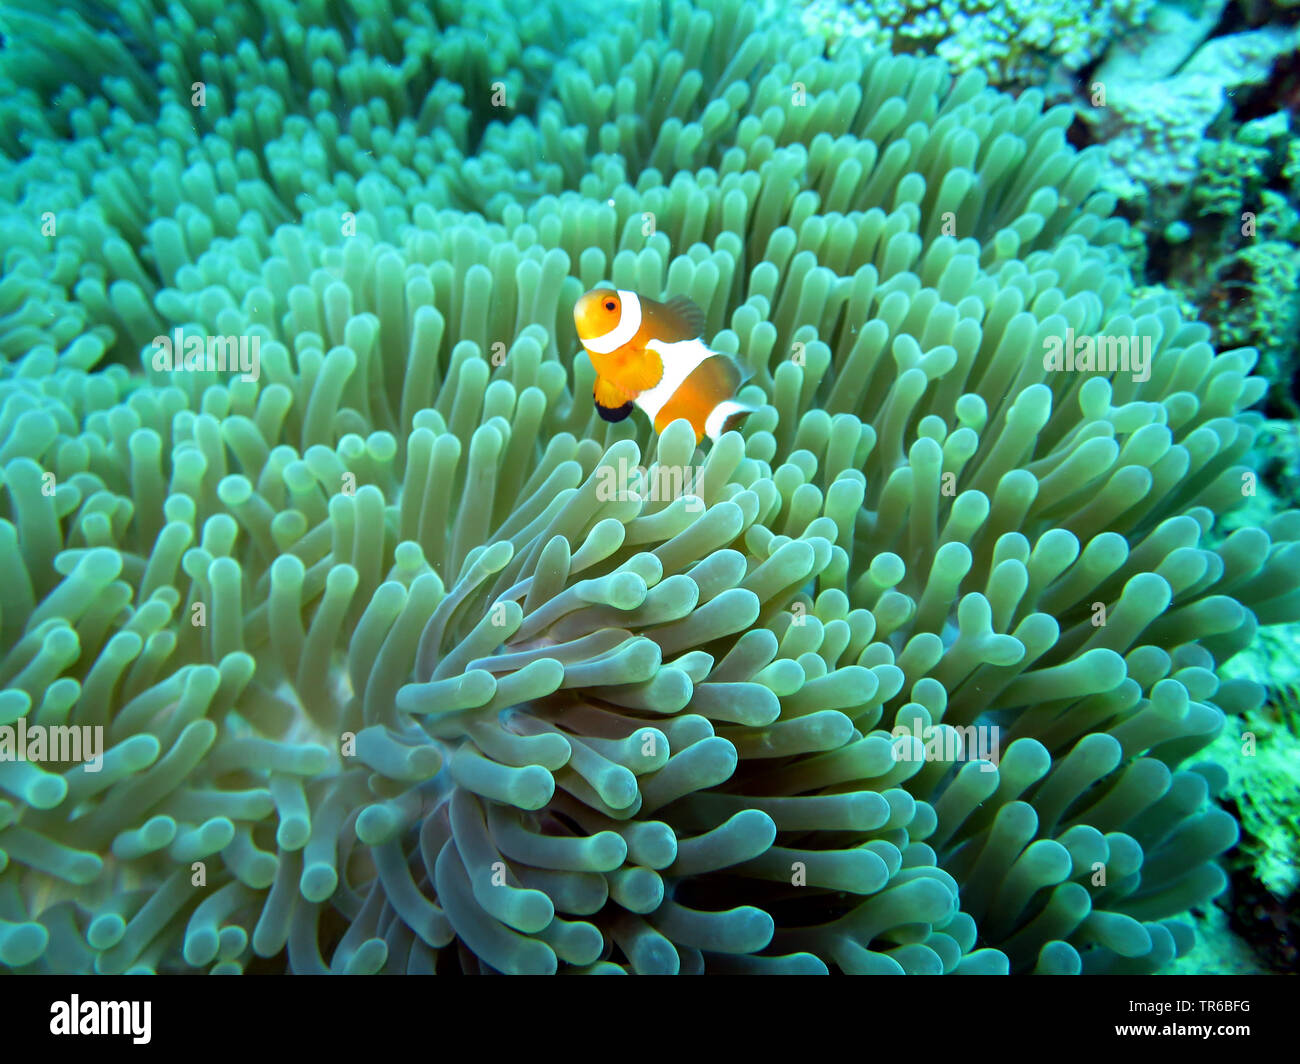 false clown anemonefish, clown anemonefish (Amphiprion ocellaris), on a Ritteri anemone, Heteractis magnifica, Philippines, Southern Leyte, Panaon Island, Pintuyan Stock Photo